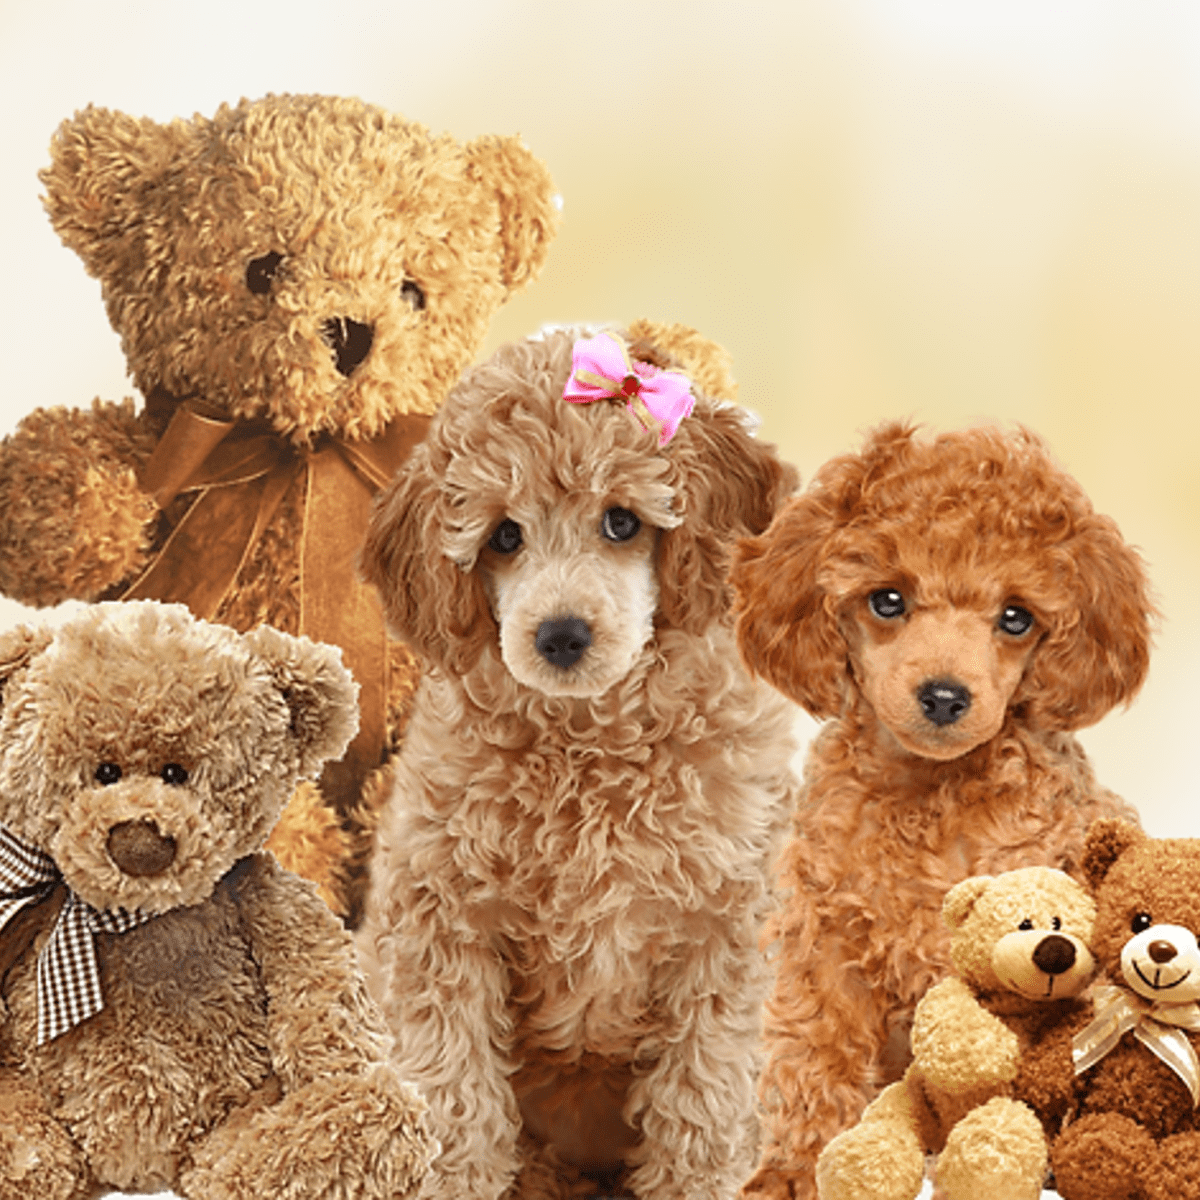 what breeds are teddy bear